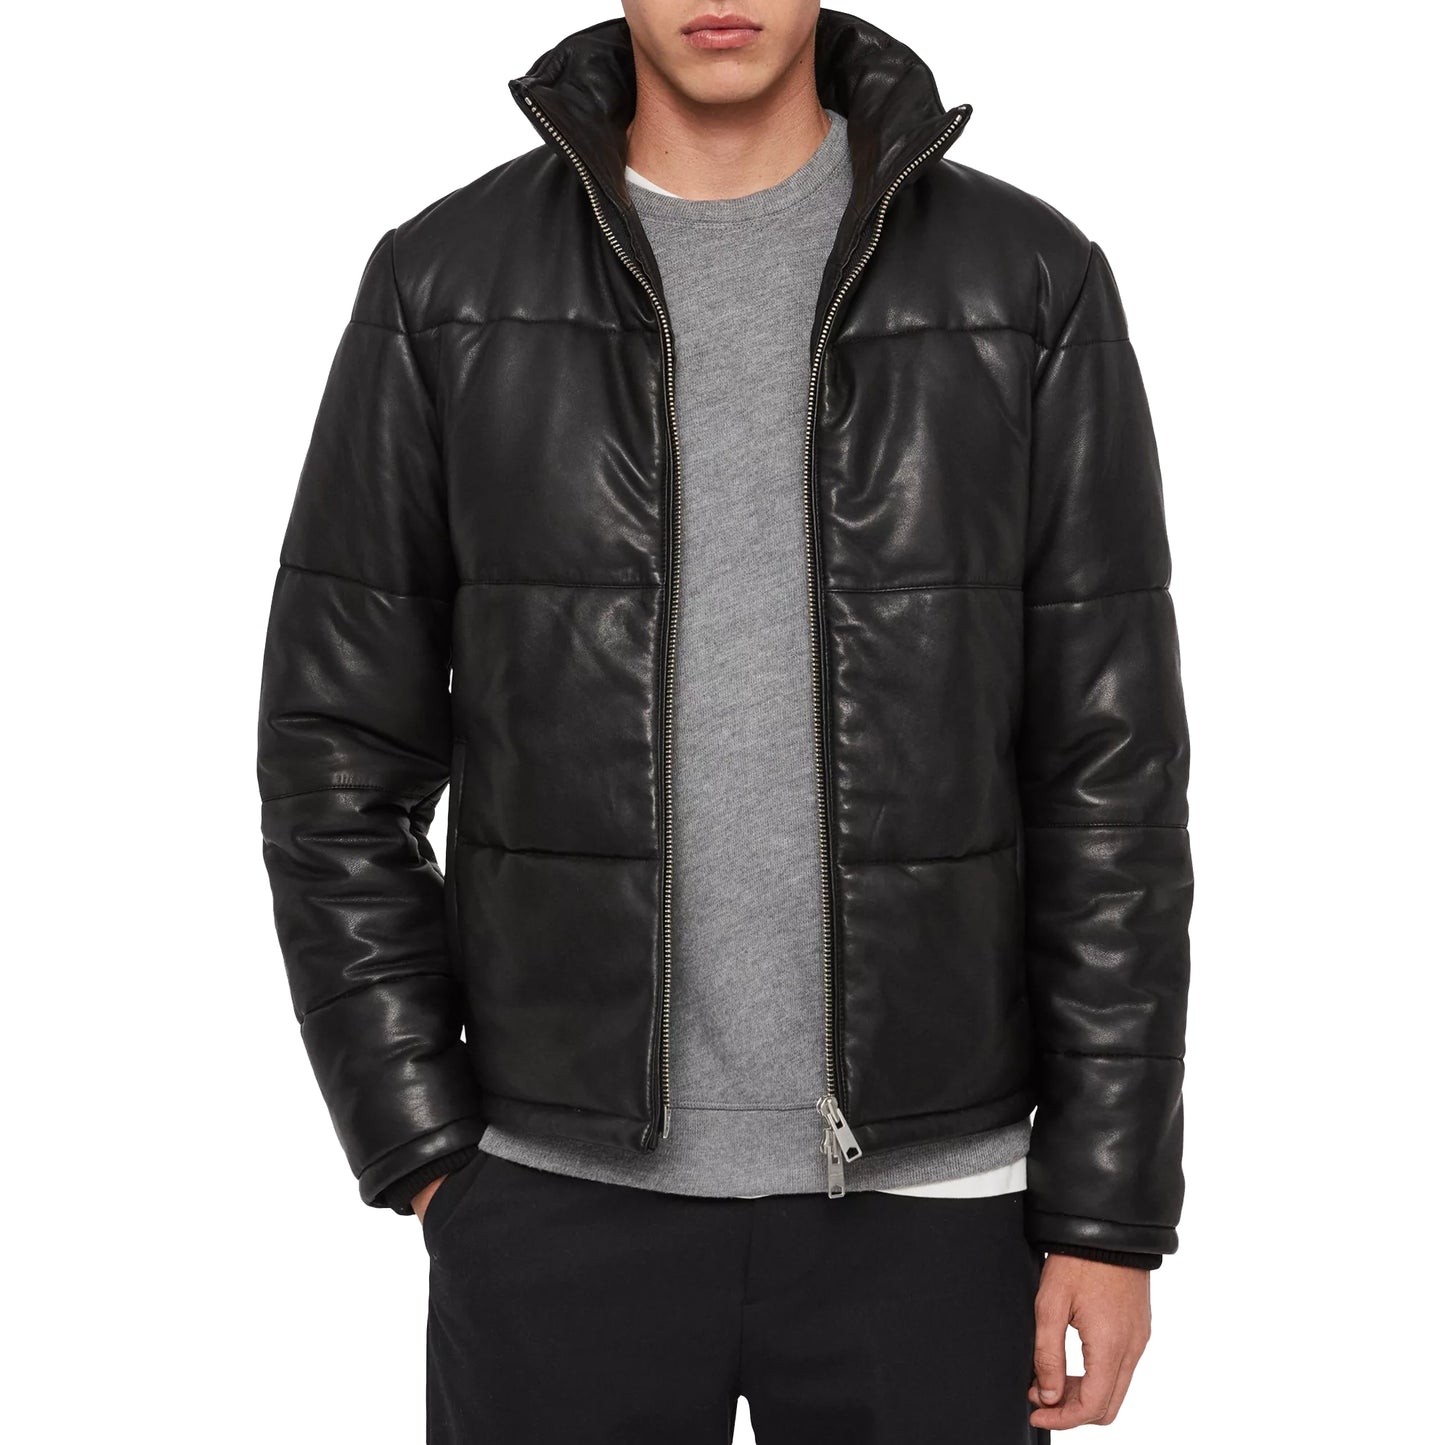 Black Puffer Leather Jacket for Men - Amine – Tango.